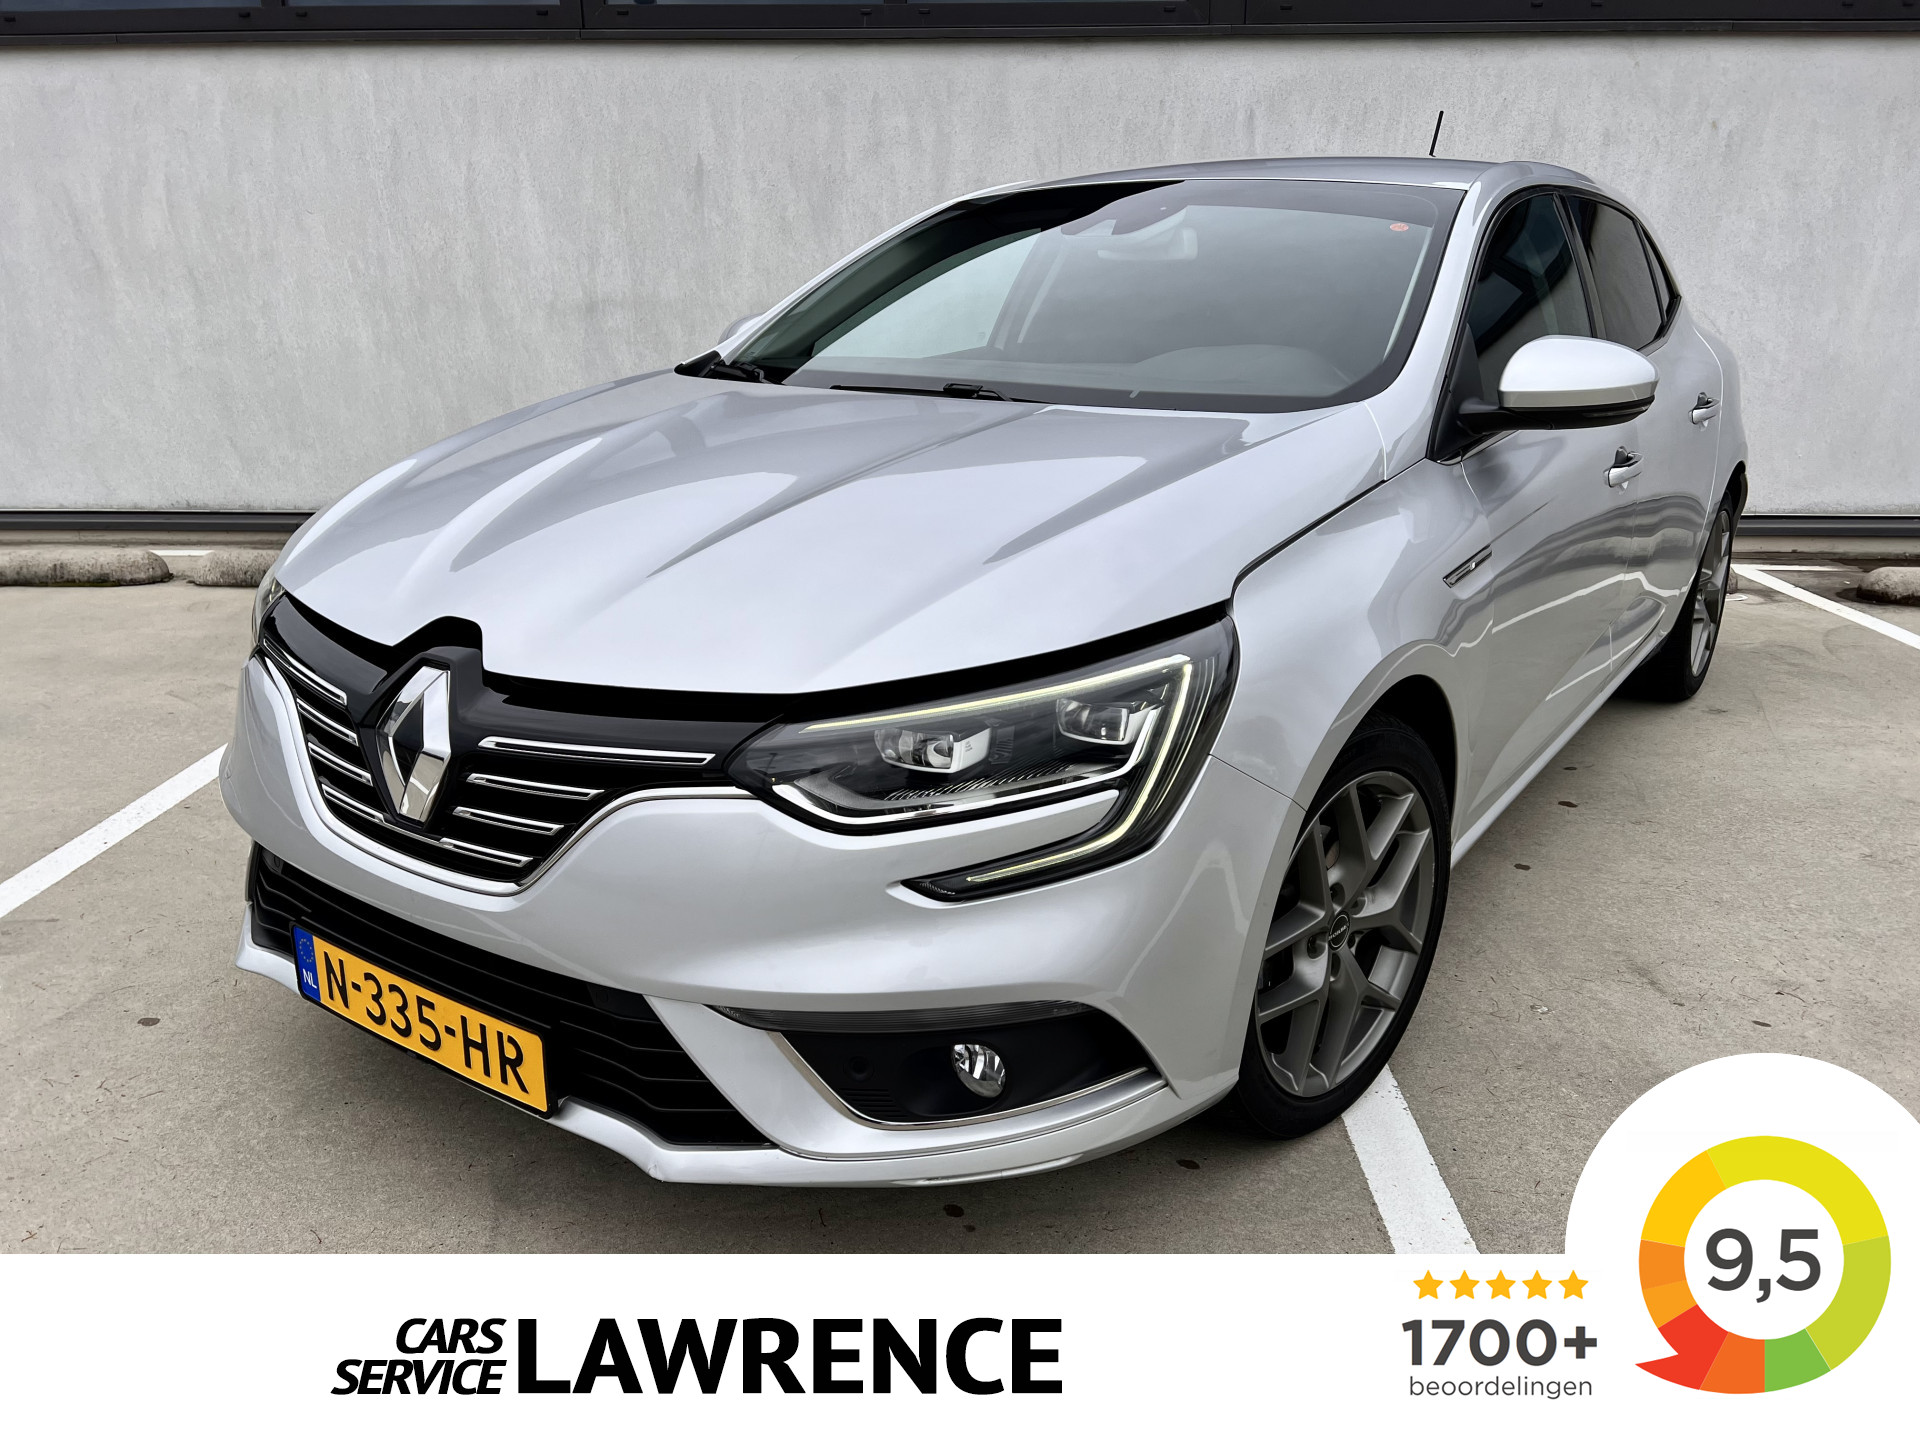 Renault Mégane 1.3 TCe 140 pk Limited | Airco | Navi | Apple-Android | Cruise | Camera | | Groot LED Scherm | % Bovag Occasion Partner % bij viaBOVAG.nl